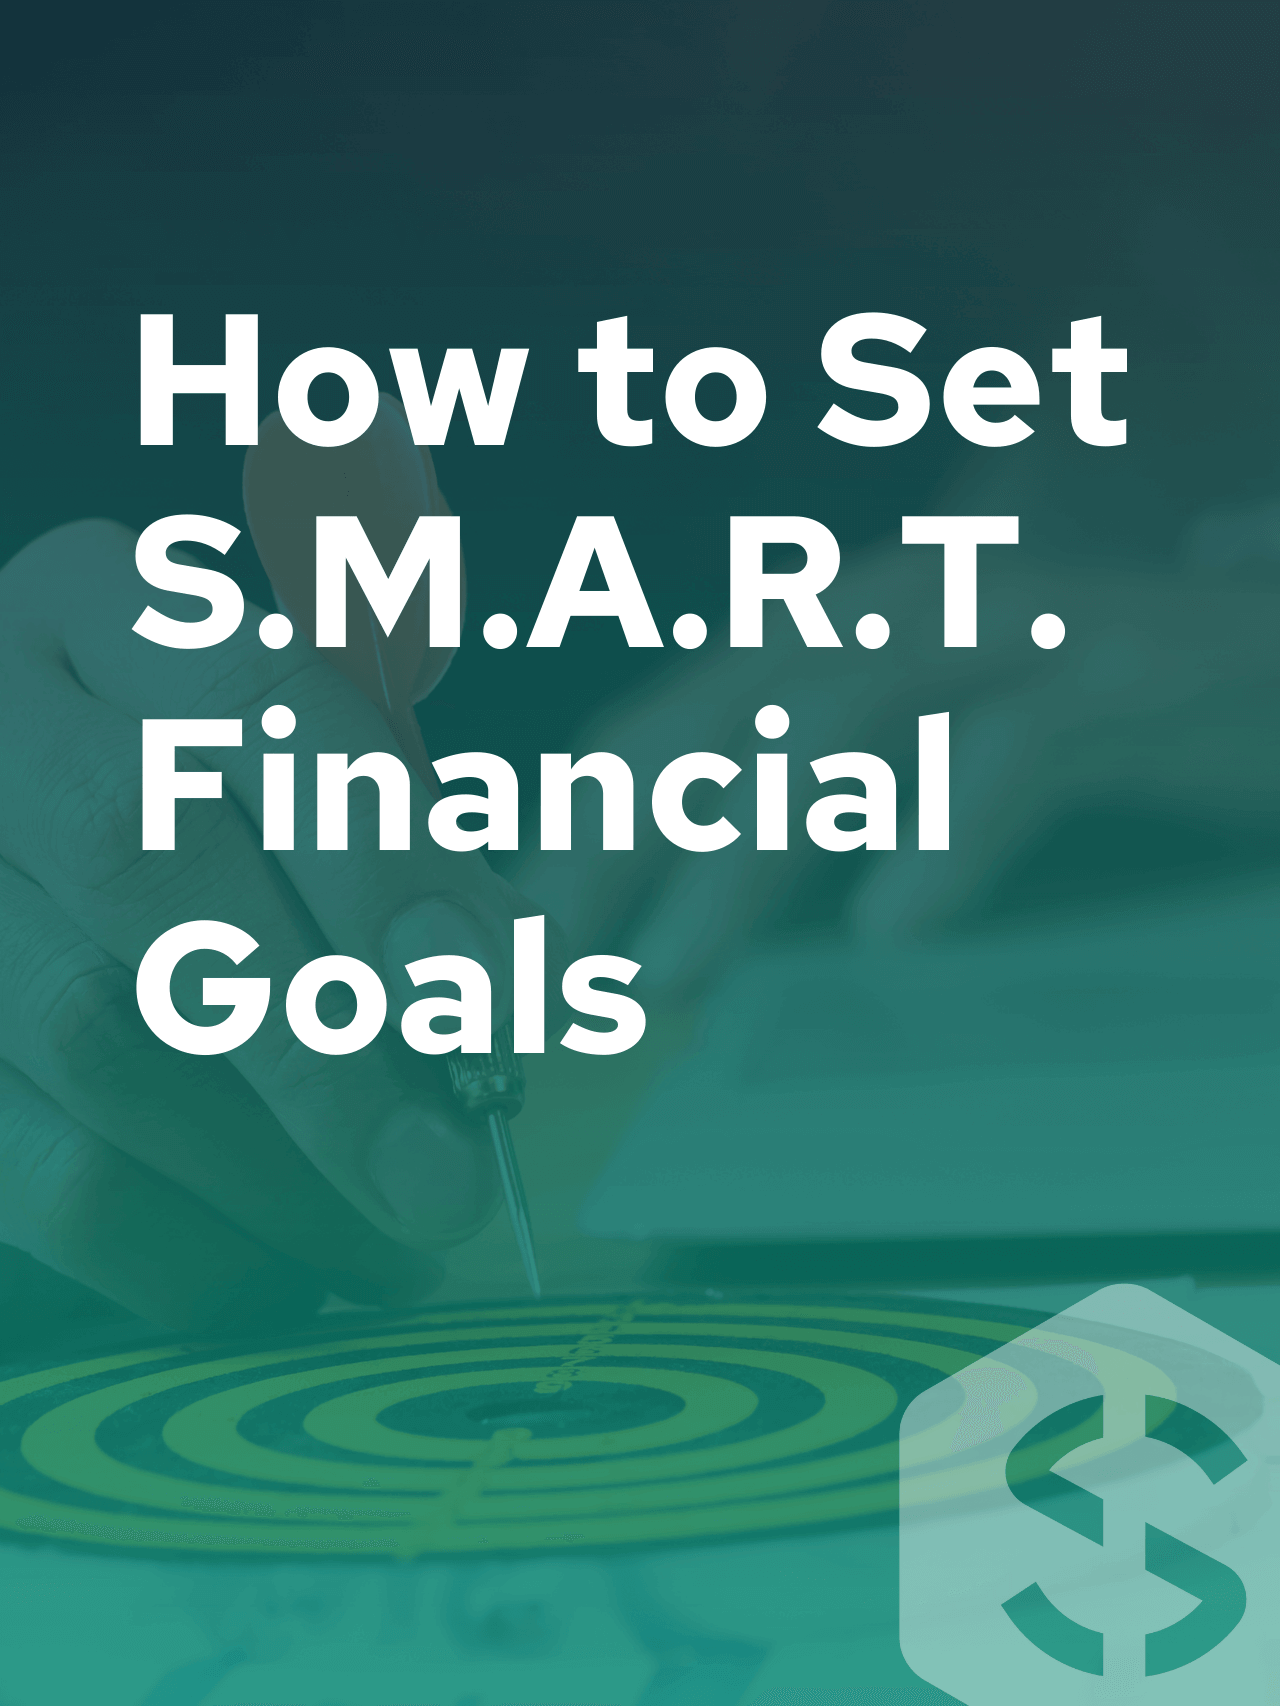 How to Set SMART Financial Goals with Savology